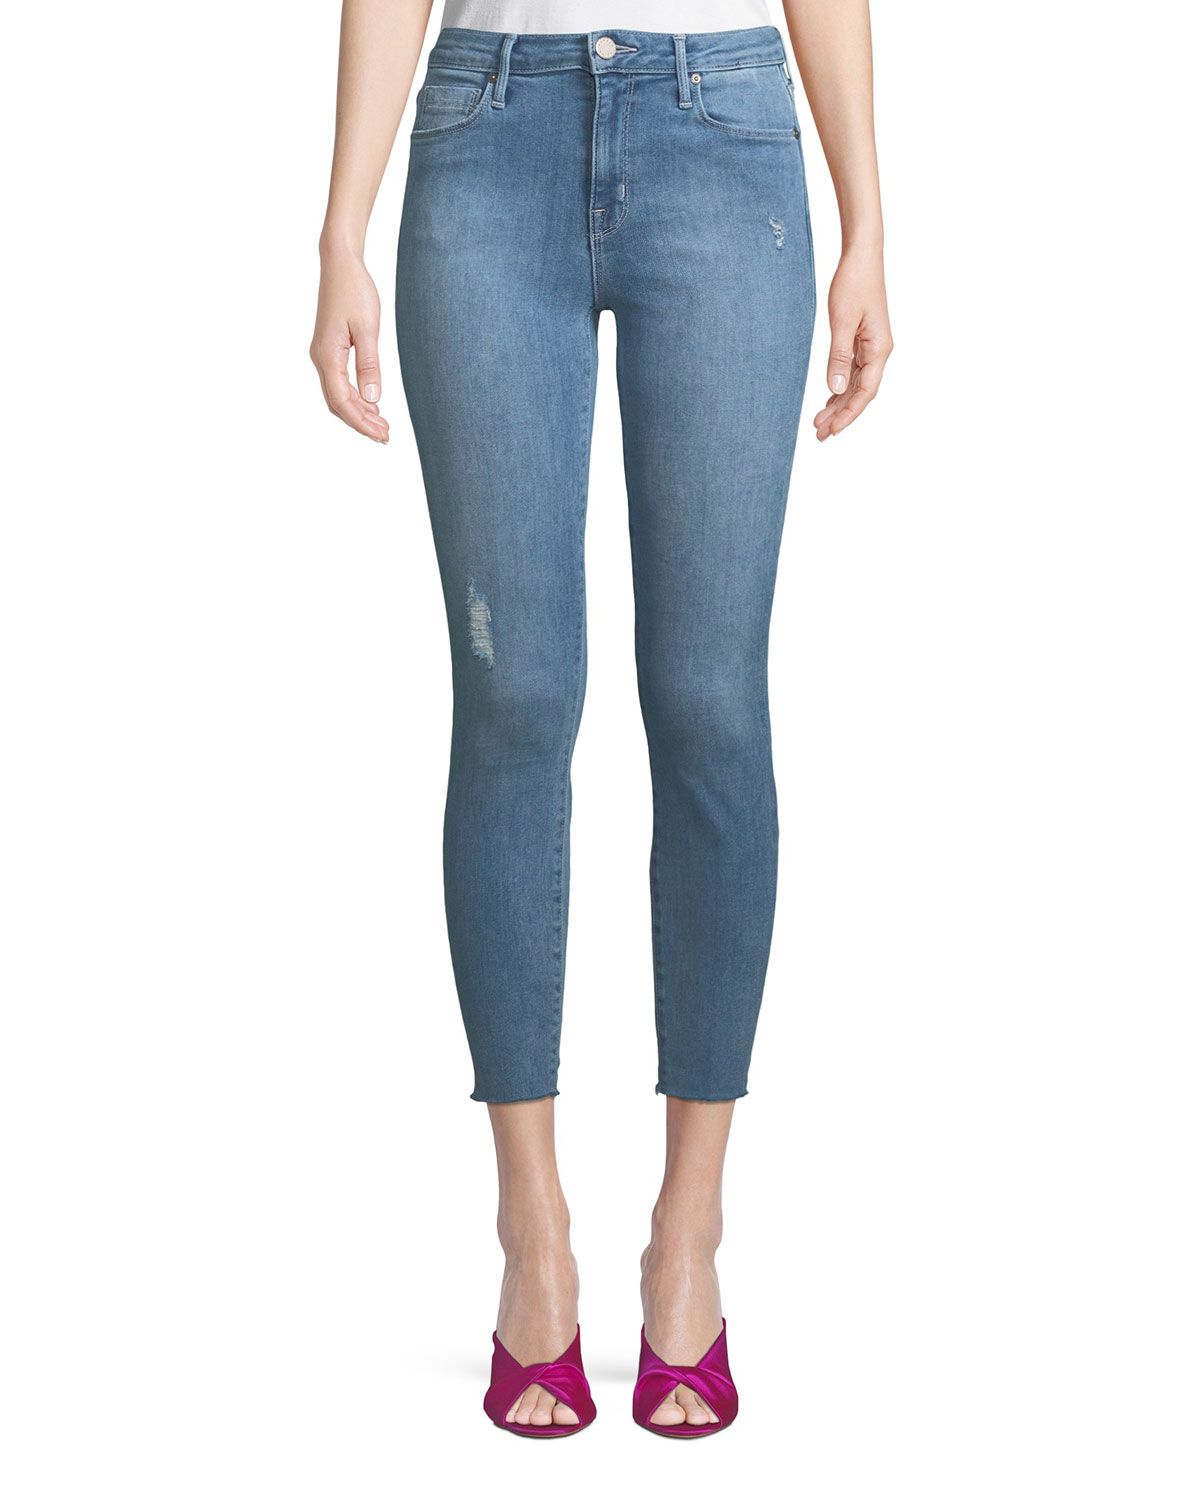 Bombshell Cropped Skinny Jeans with Light Distressing | Neiman Marcus